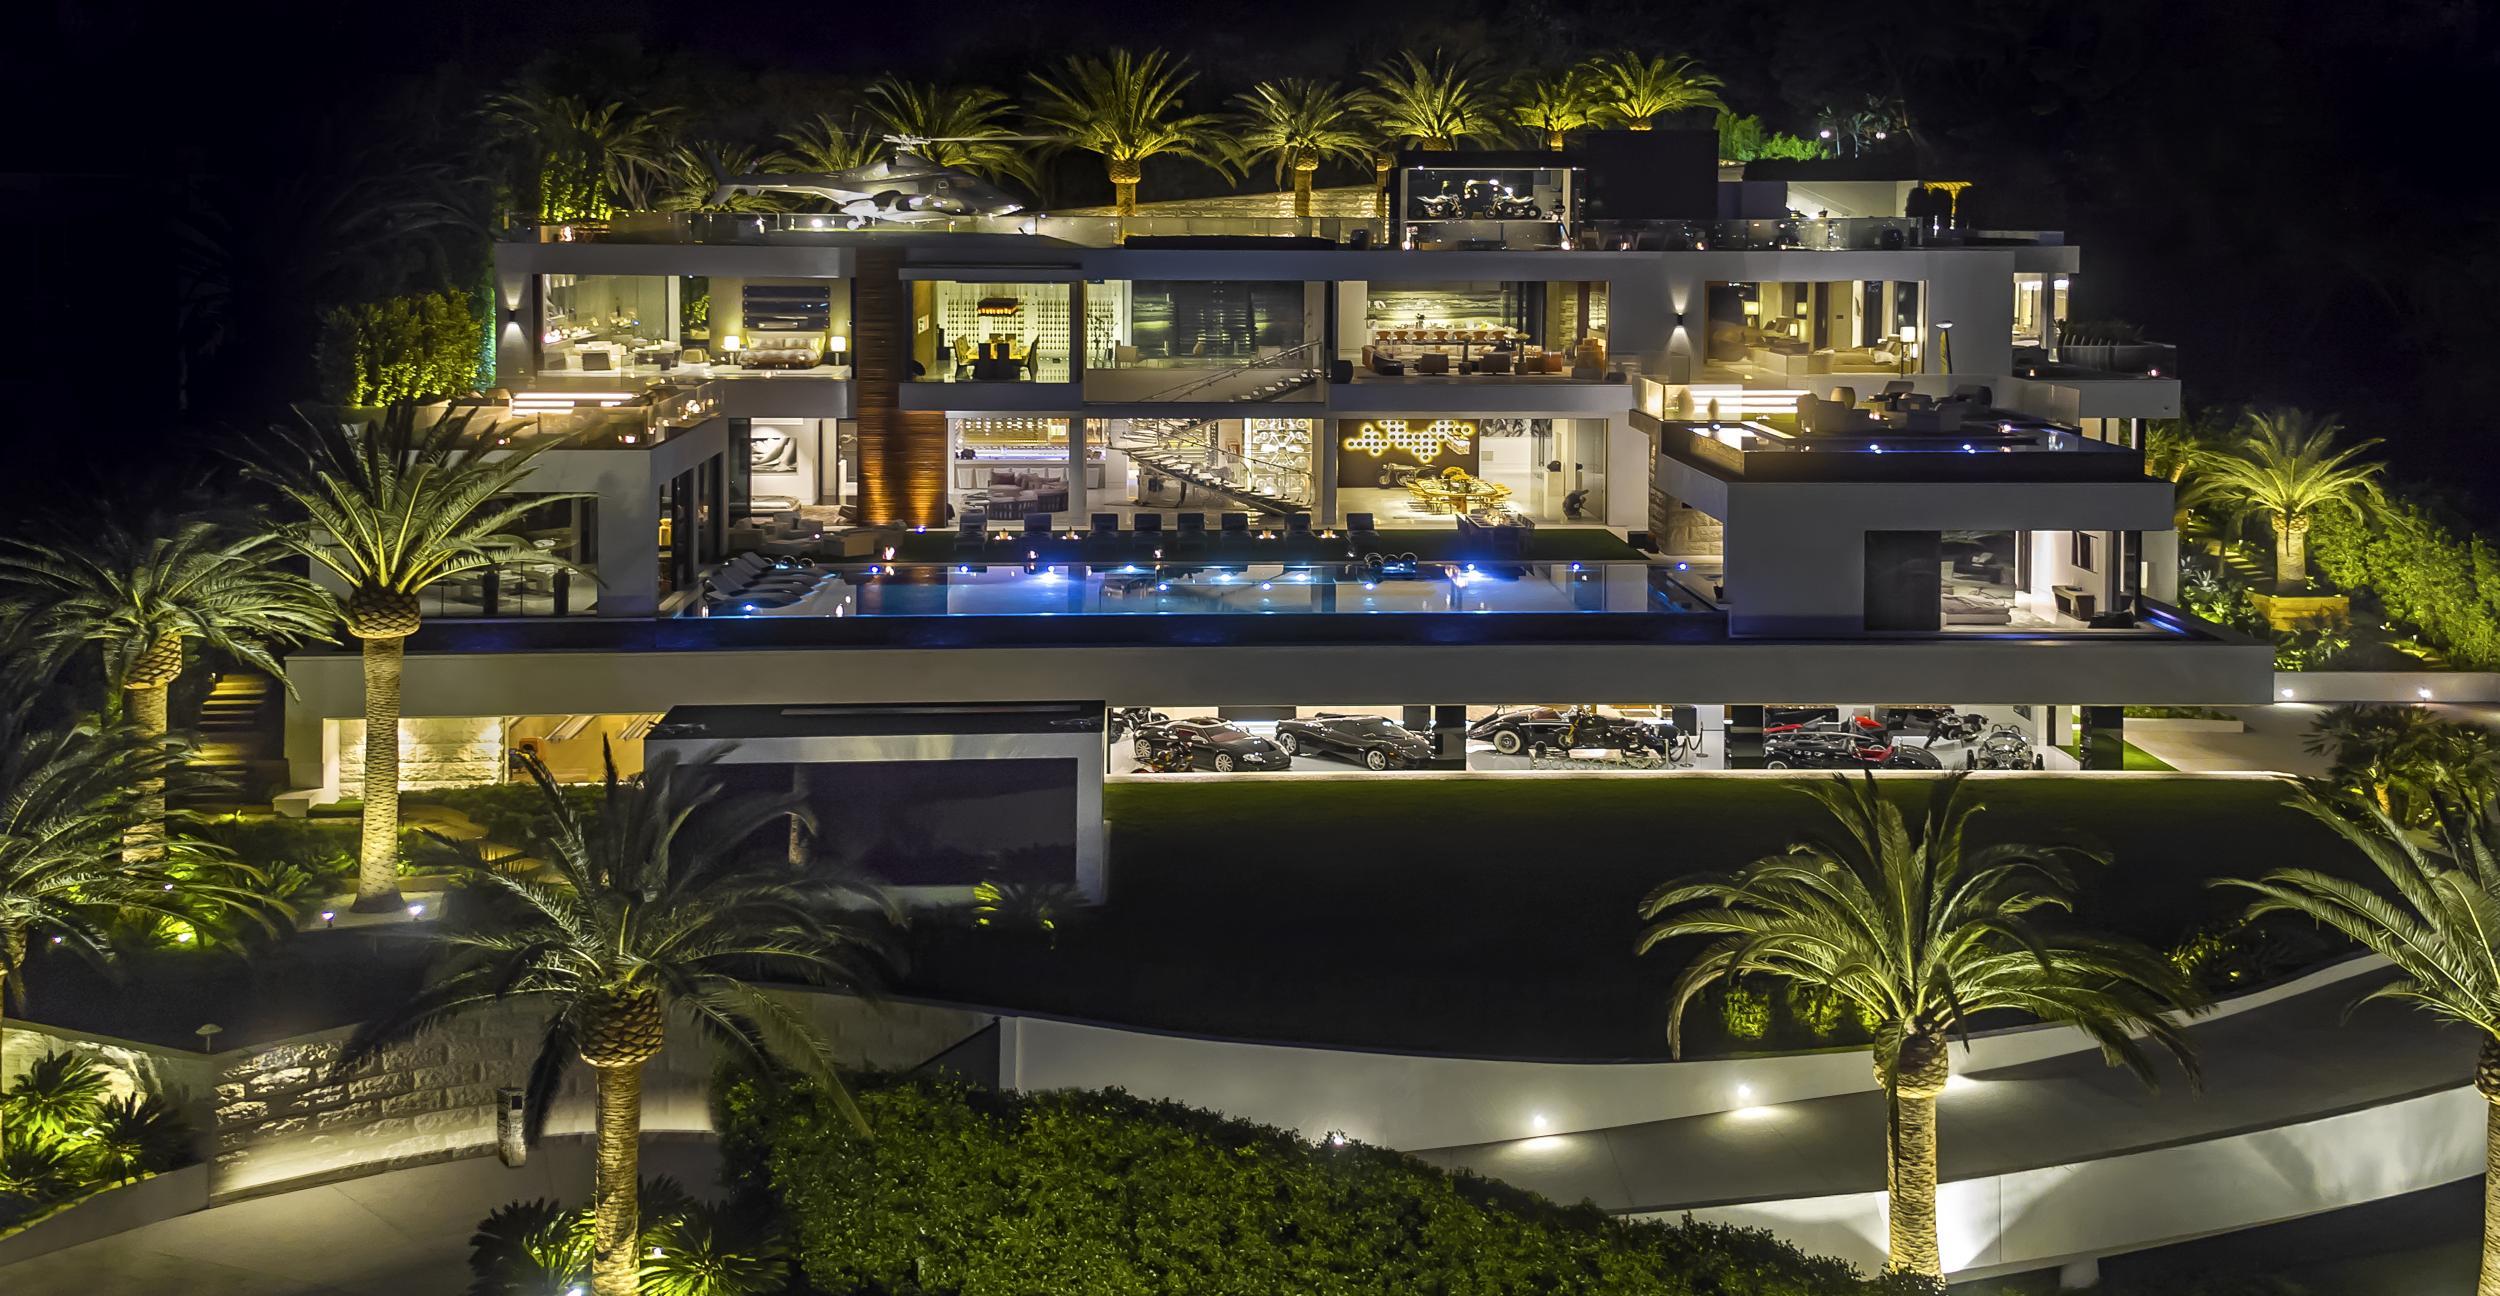 The home is nicknamed "Billionaire" (Berlyn Photography)